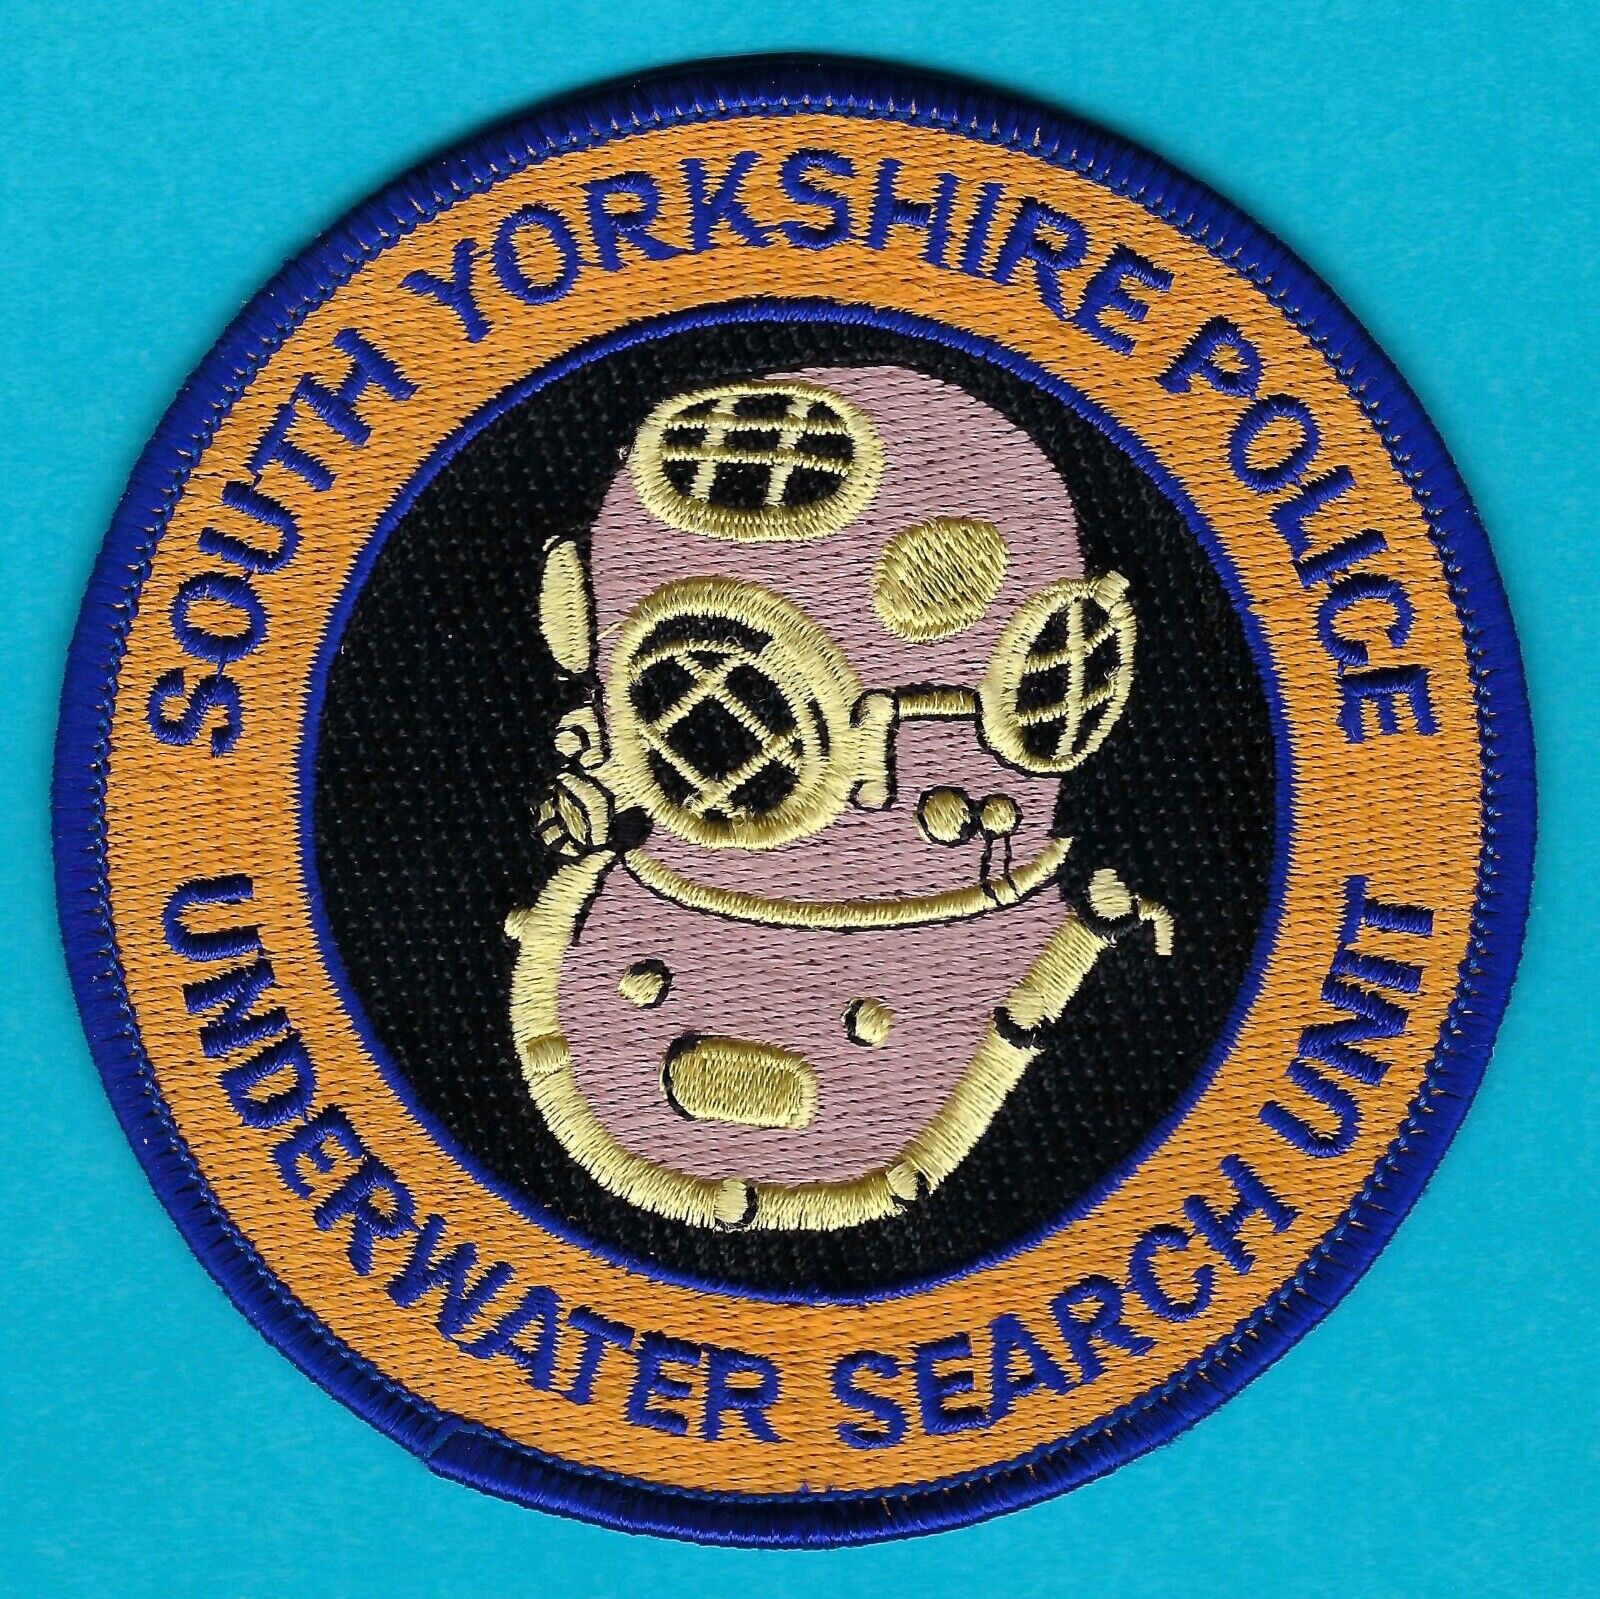 SOUTH YORKSHIRE UNITED KINGDOM POLICE UNDERWATER SEARCH UNIT DIVE TEAM PATCH